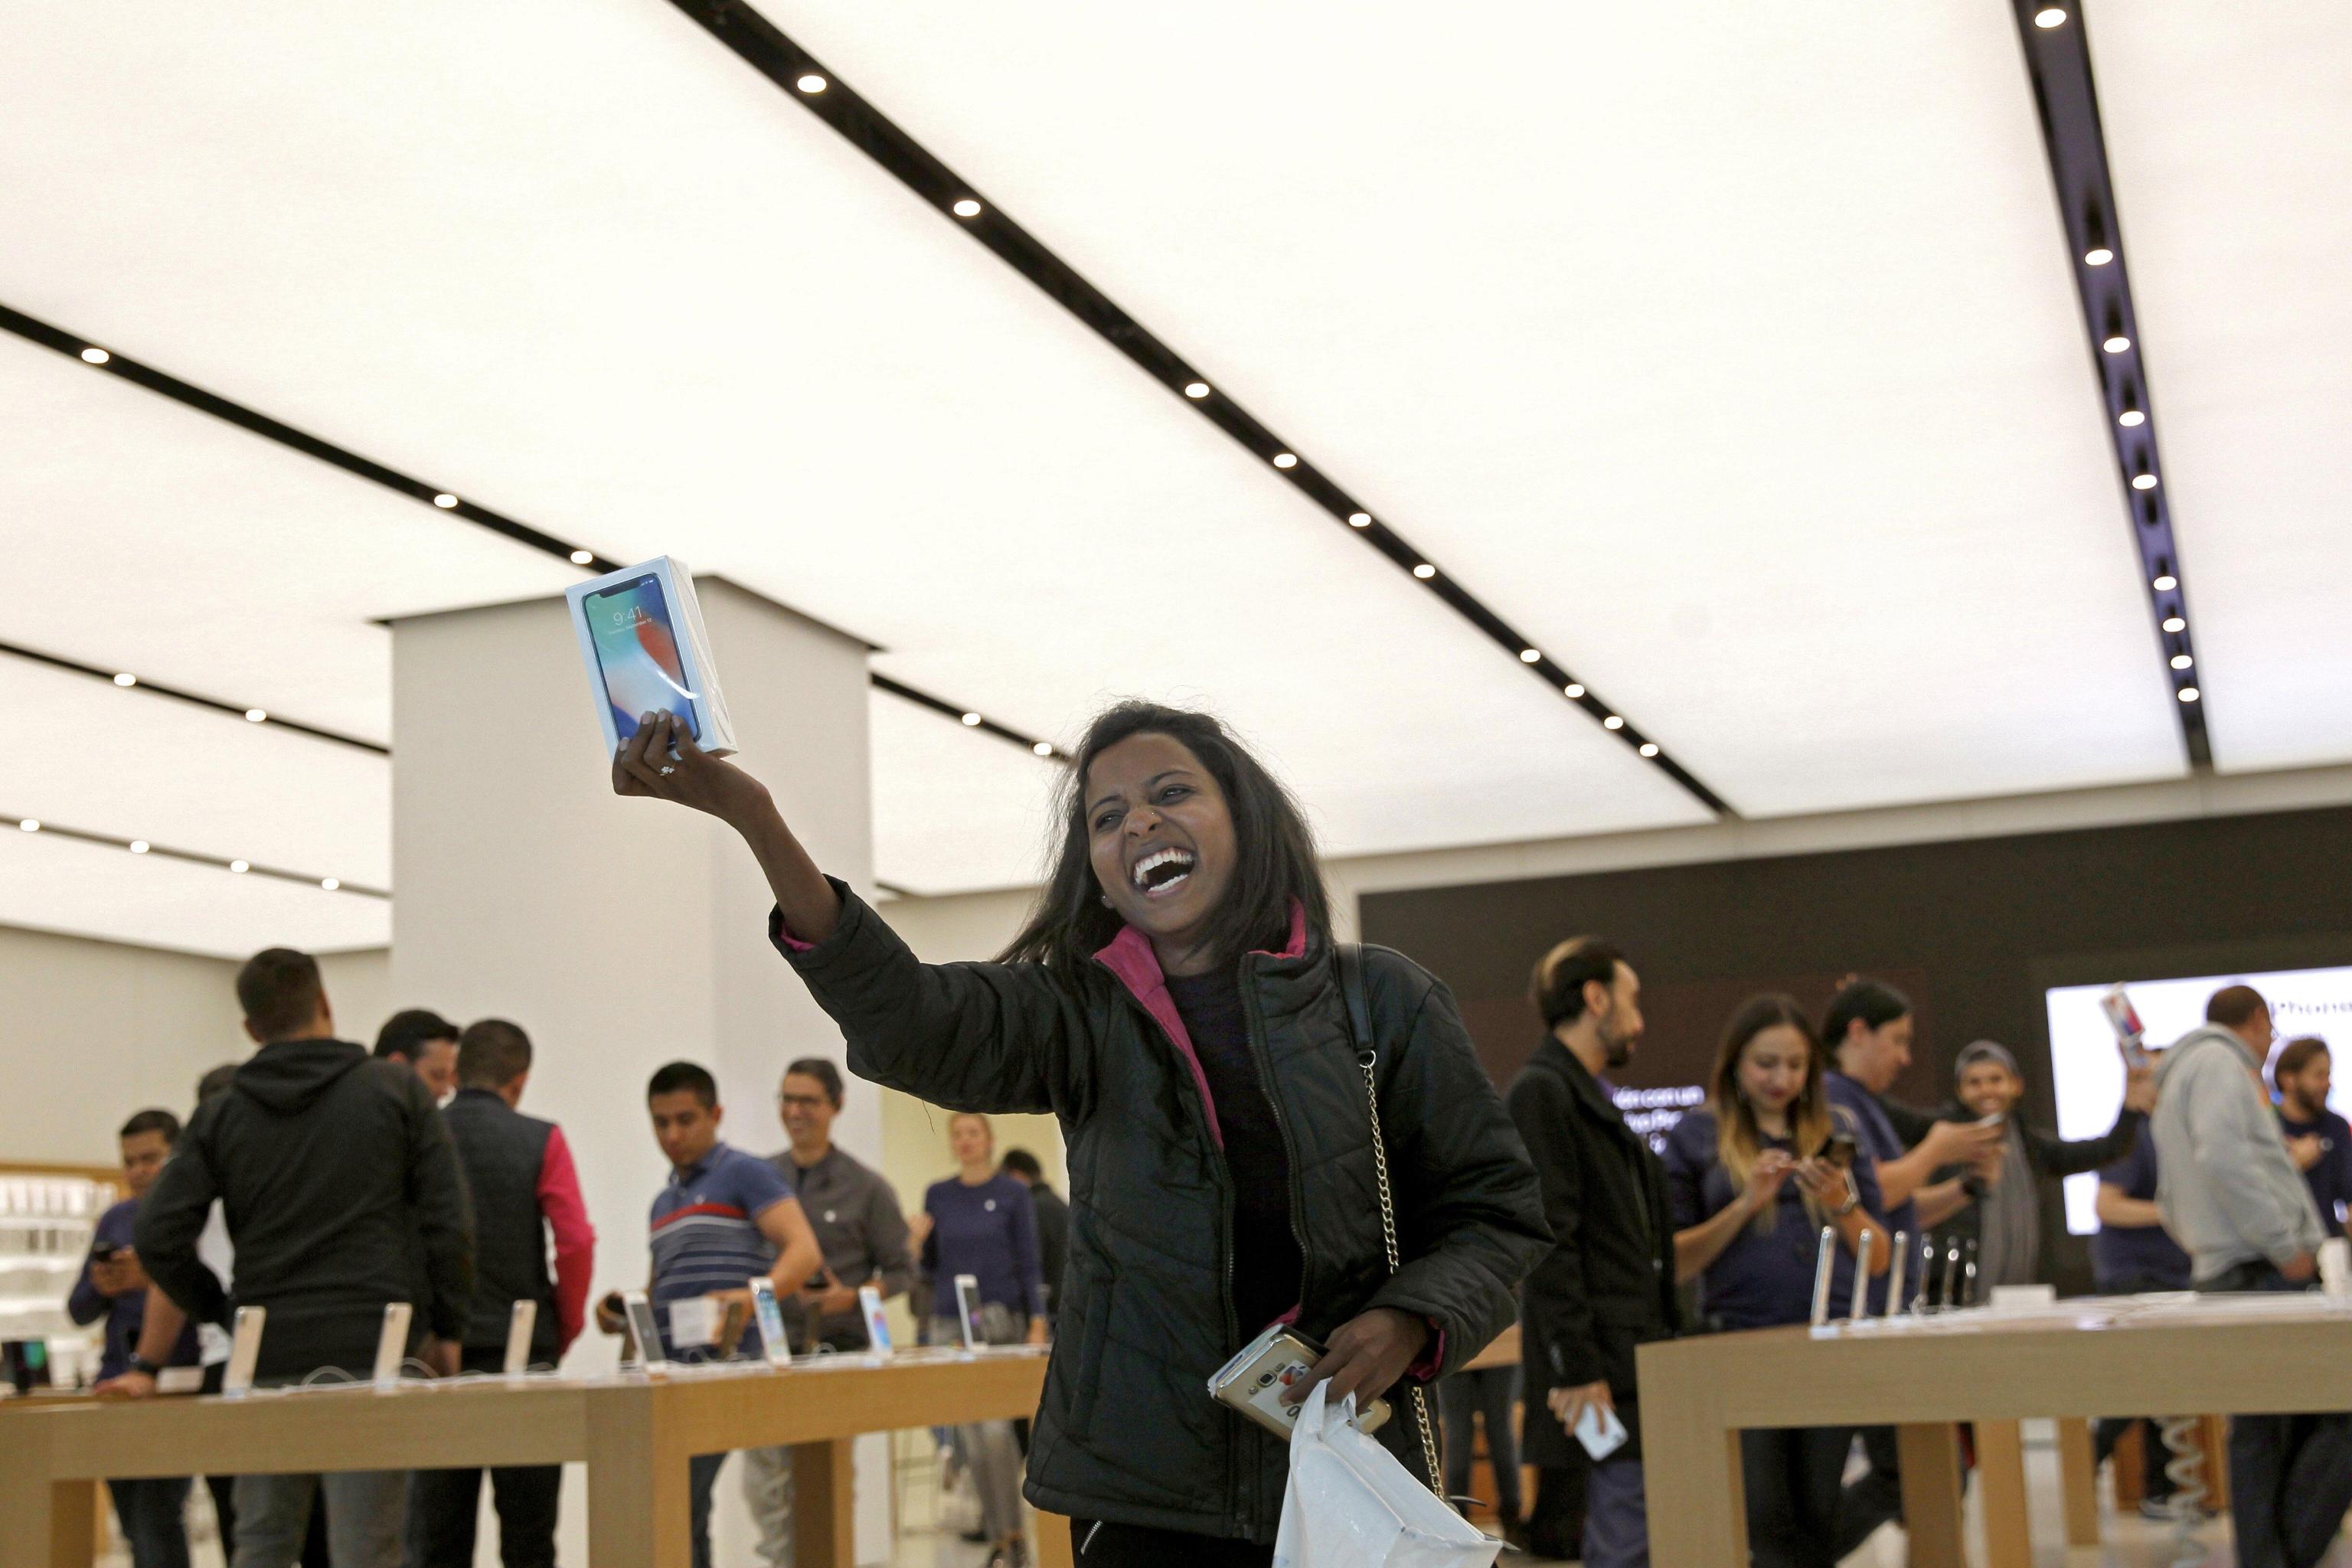 epa06306586 A customer poses with the newly released iPhone X at an Apple Store in Mexicoi City, Mexico, 03 November 2017. Apple launched its new iPhone X 03 November marking the 10-year anniversary of the first ever iPhone. Apple's new iPhone X goes on sale in more than 55 countries.  EPA/Sashenka Gutierrez